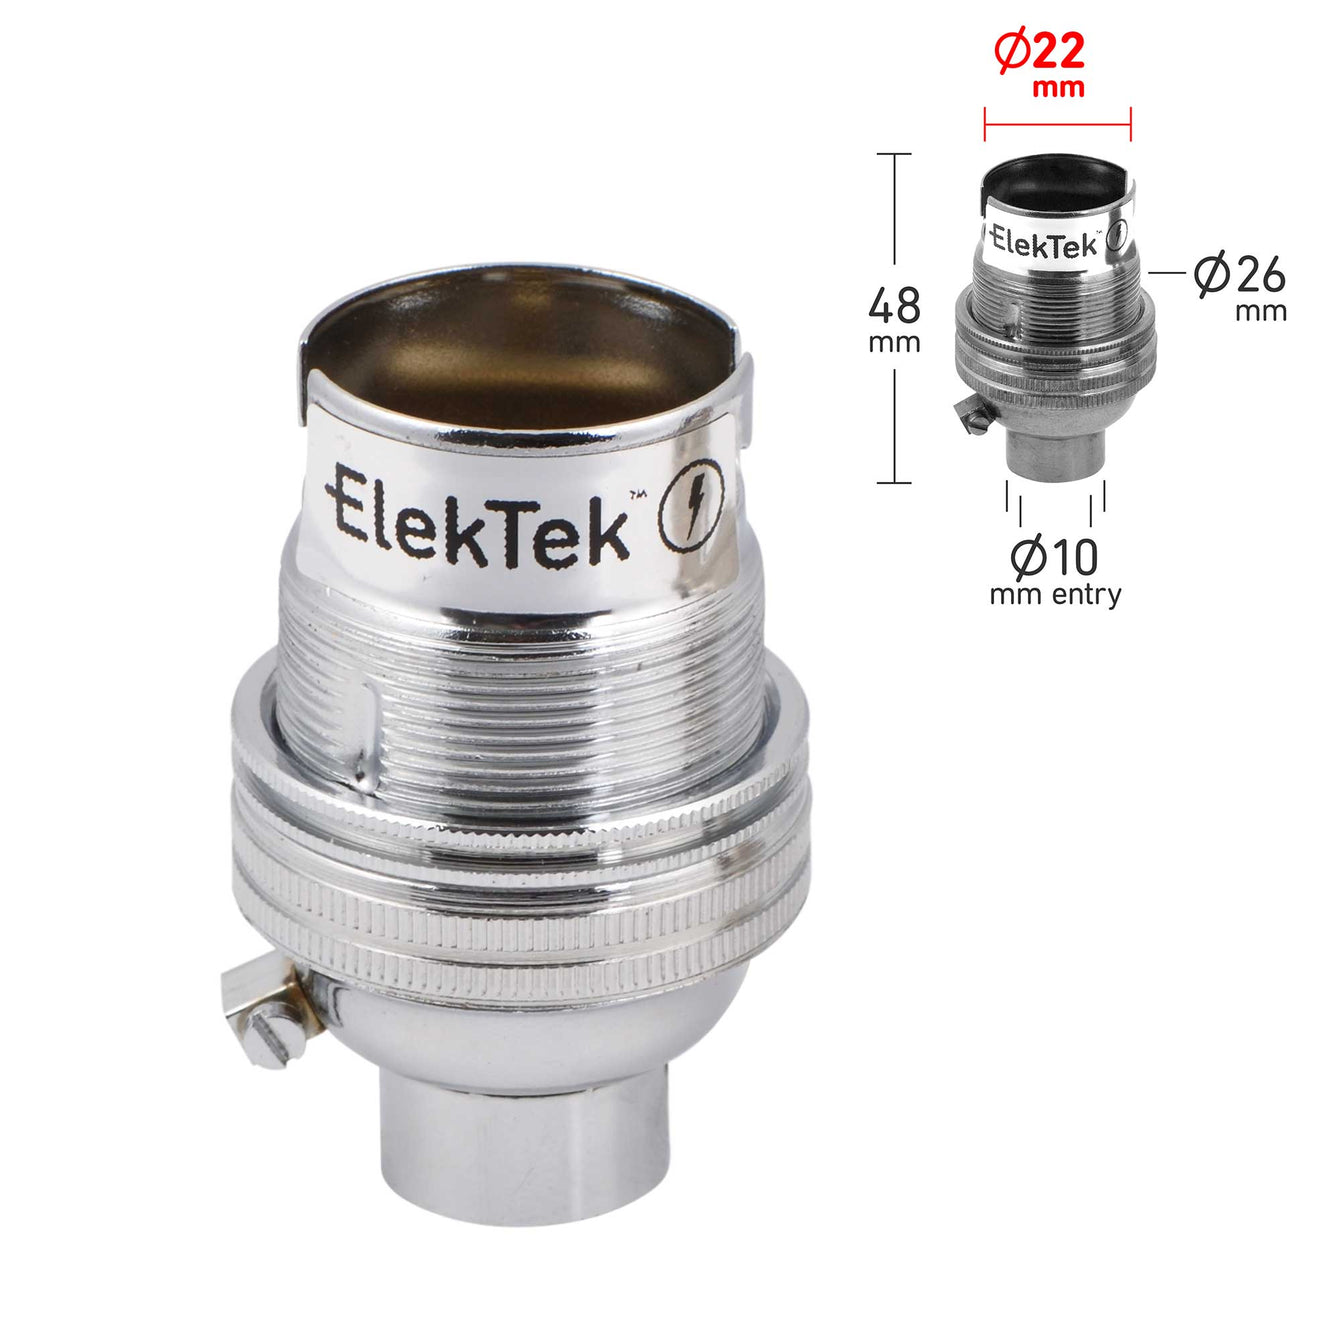 ElekTek Lamp Holder Bayonet Cap B22 Unswitched 10mm or Half Inch Entry With Shade Ring Solid Brass - Buy It Better Nickel / Half Inch